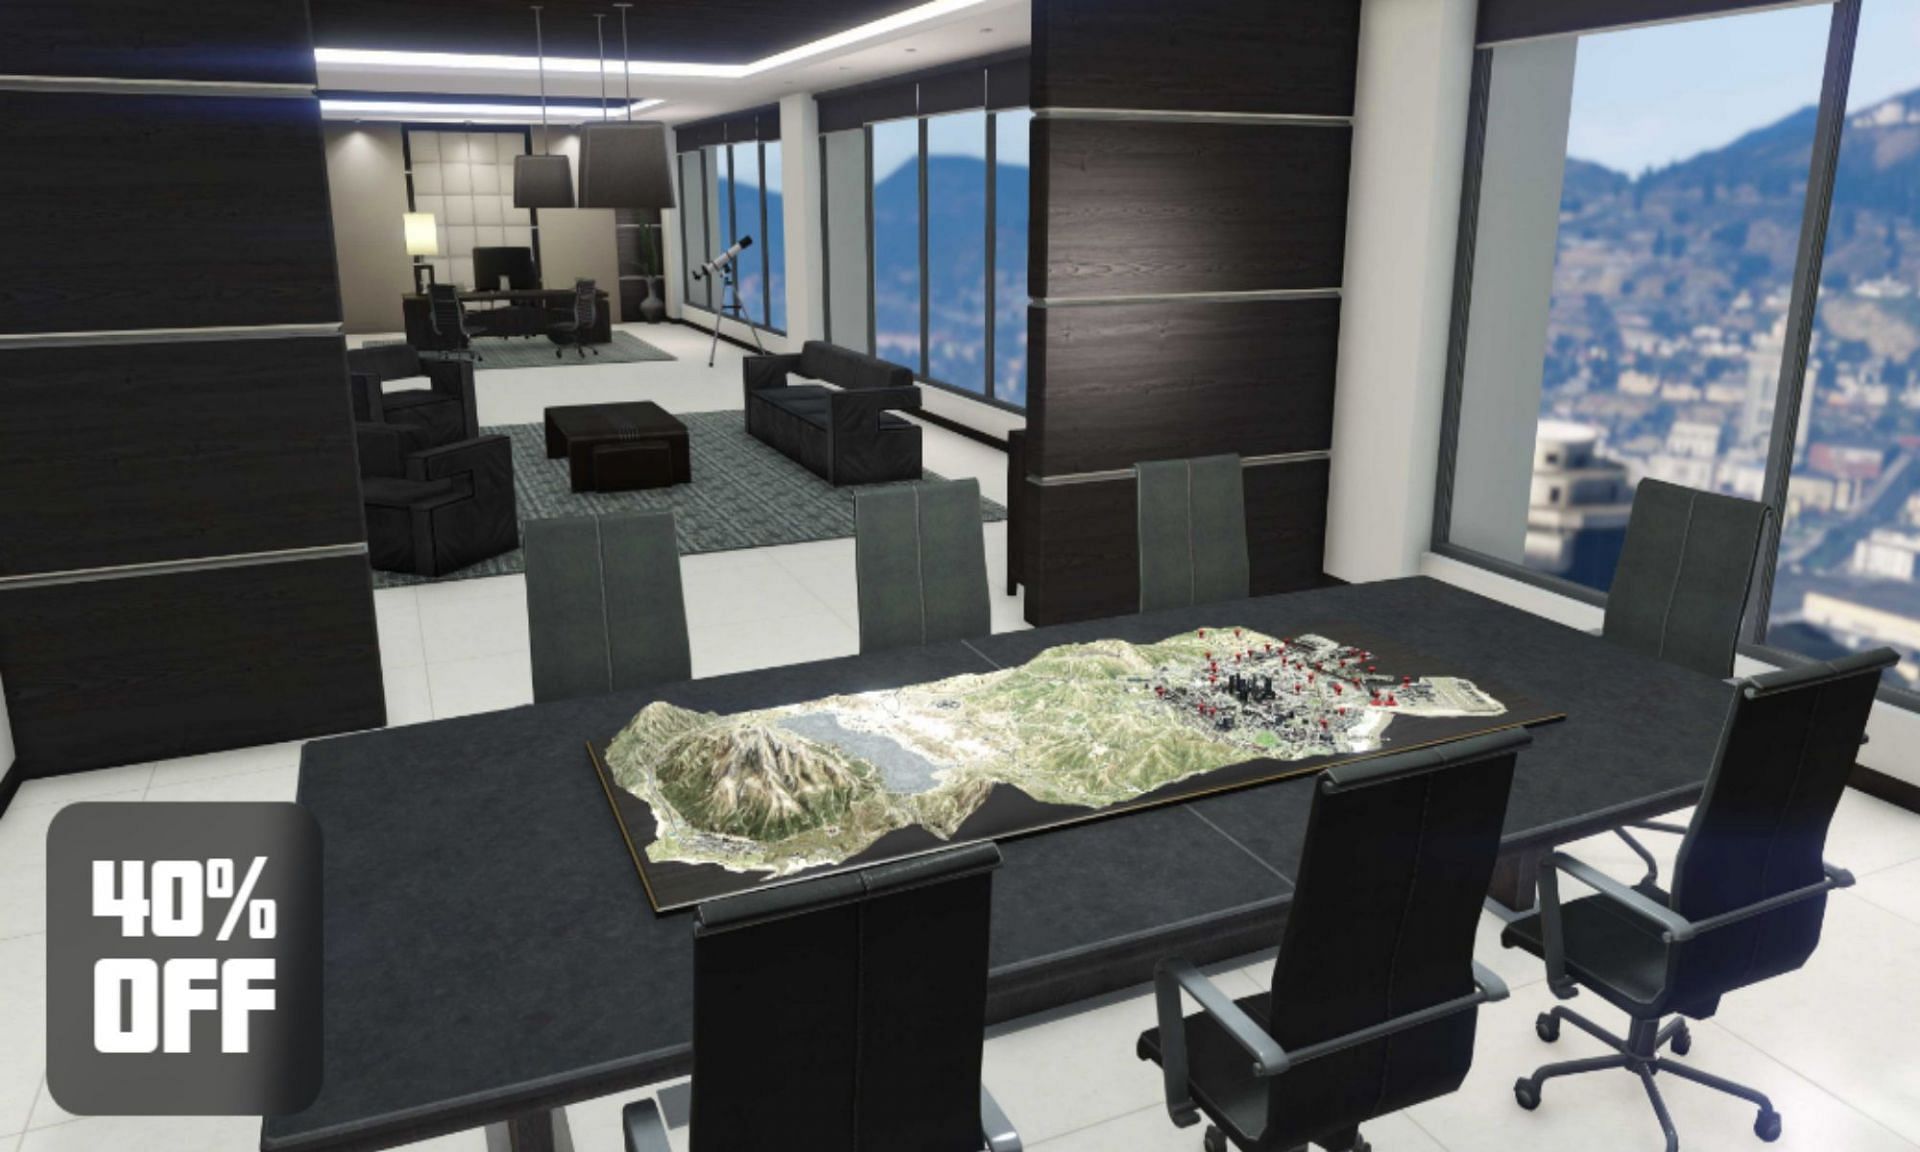 Welcome to the Executive Offices (Image via Rockstar Games)